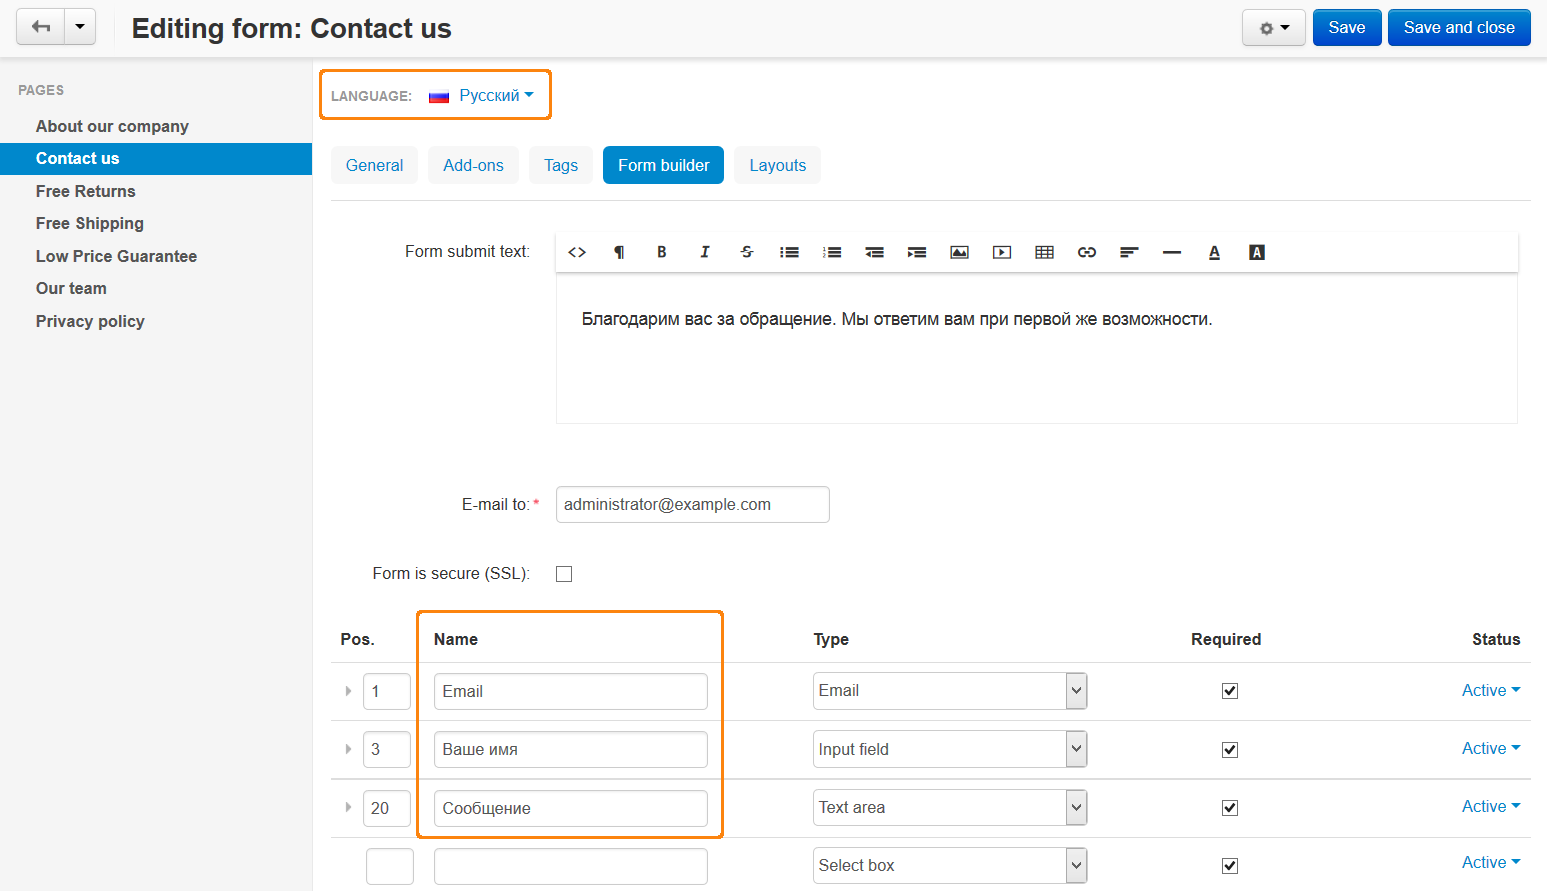 Translate the values in the Name column and save your changes to translate the form.